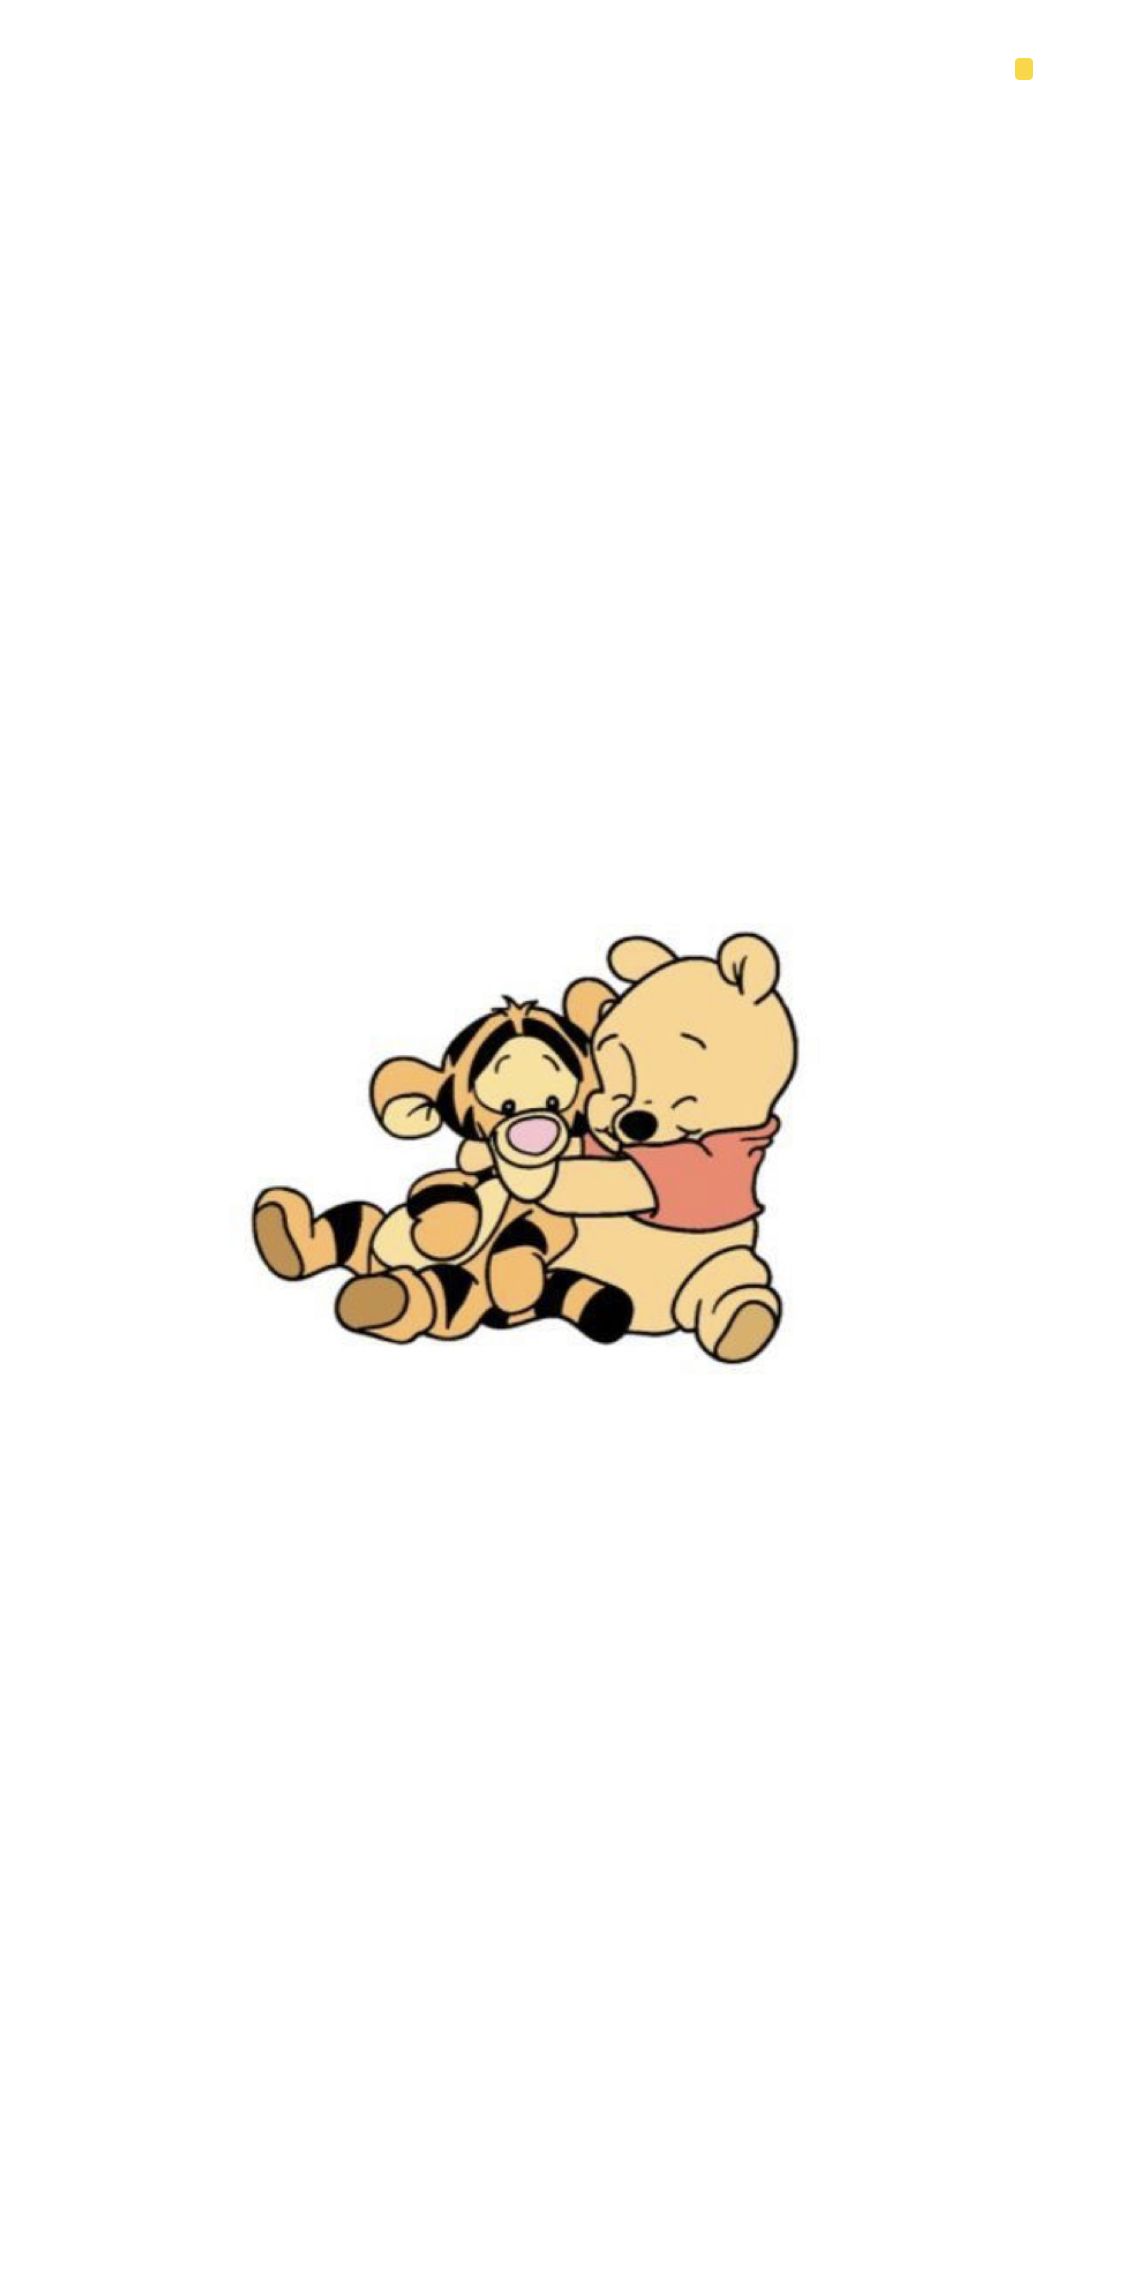 Winnie The Pooh Characters Images Wallpapers